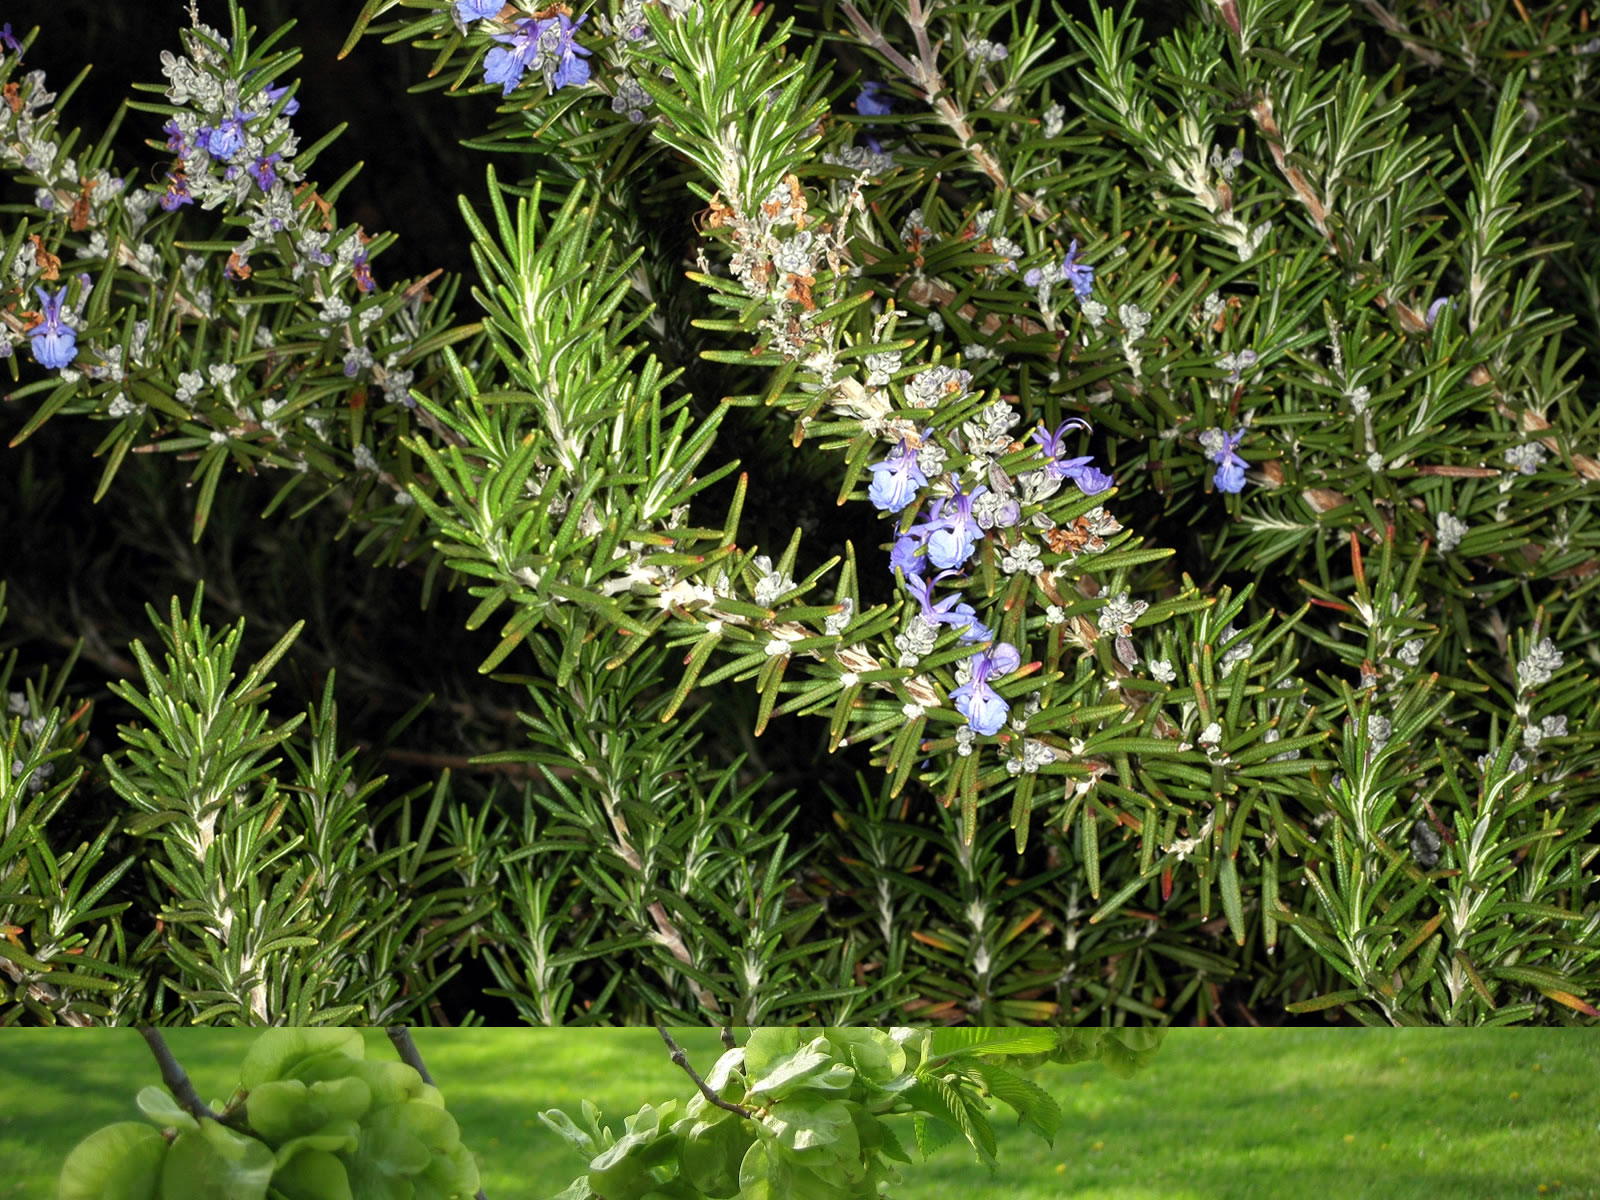 Is Rosemary Our Next Superfood?